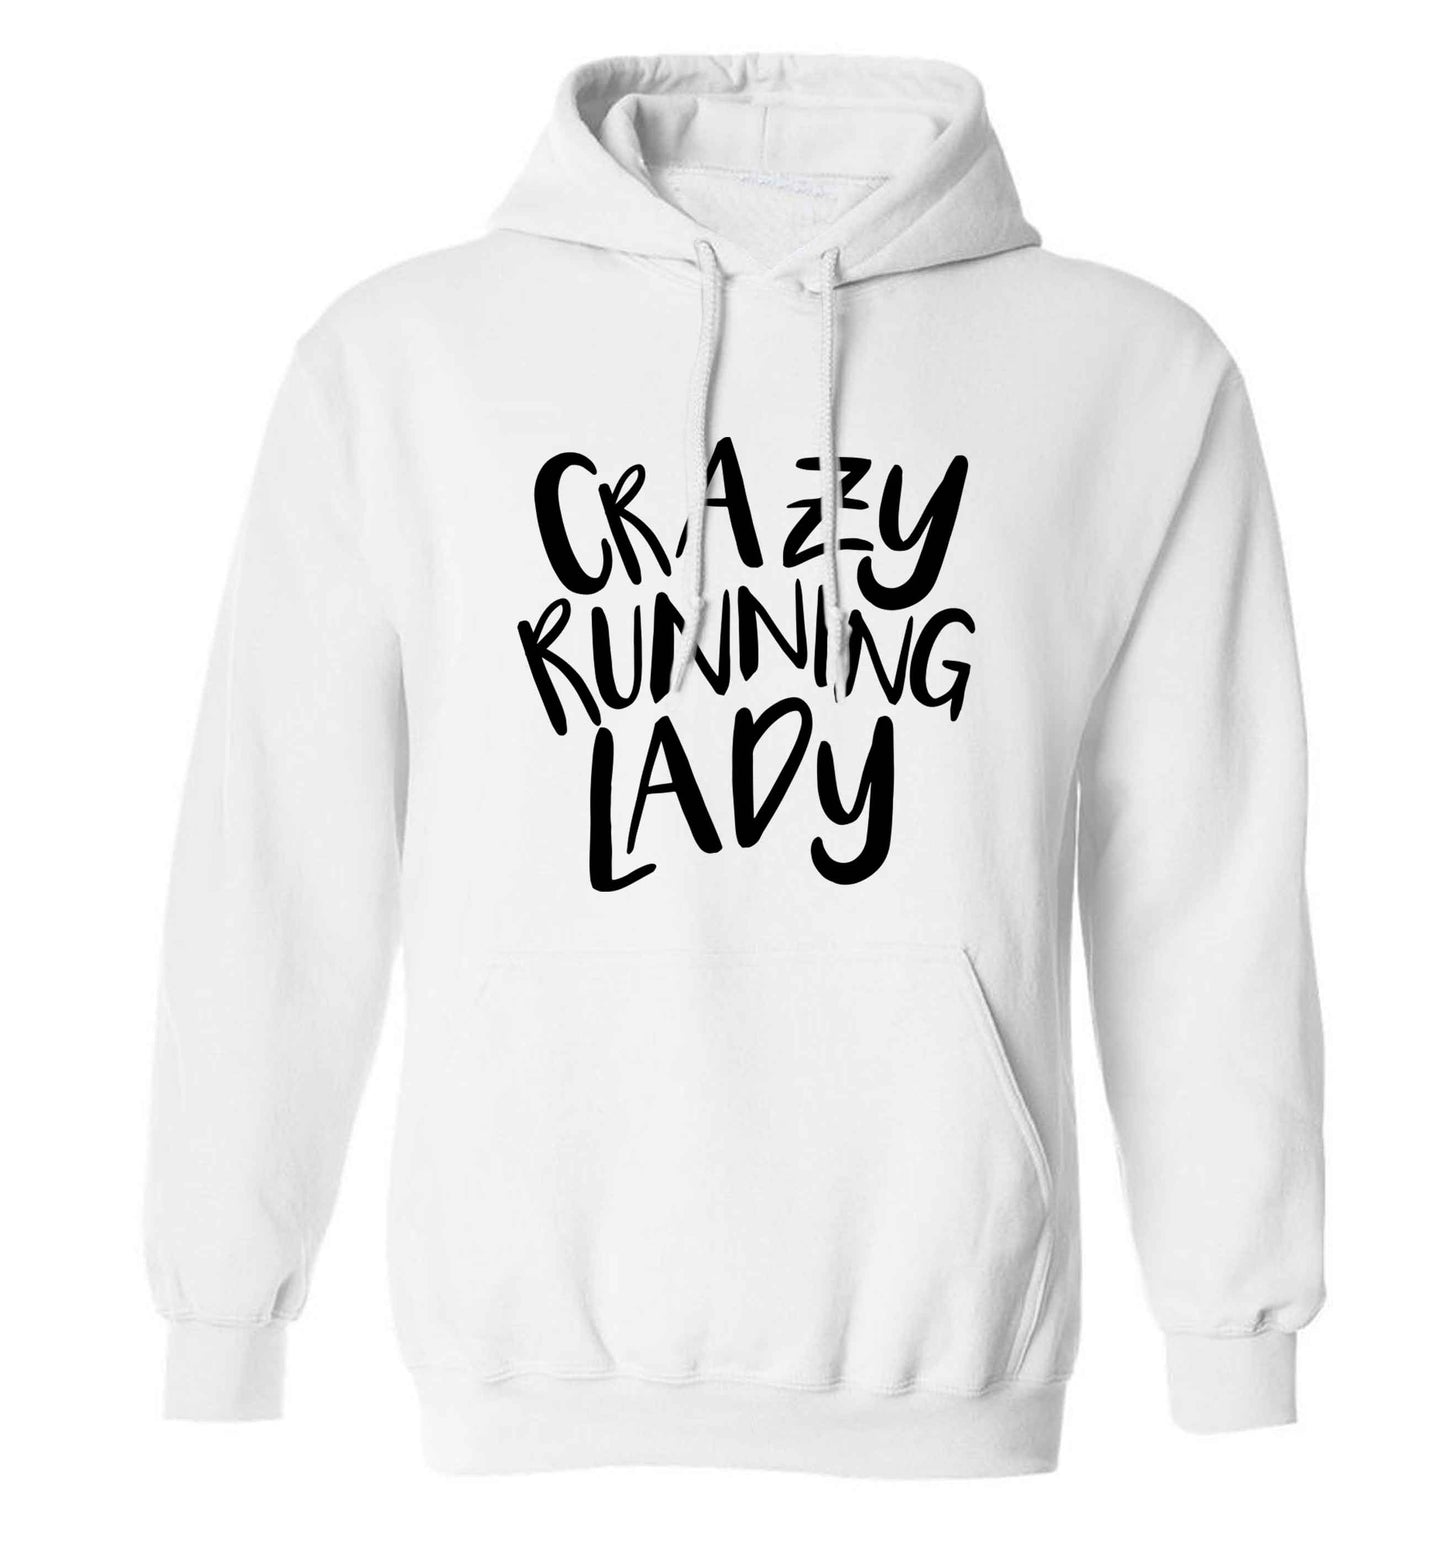 Crazy running lady adults unisex white hoodie 2XL